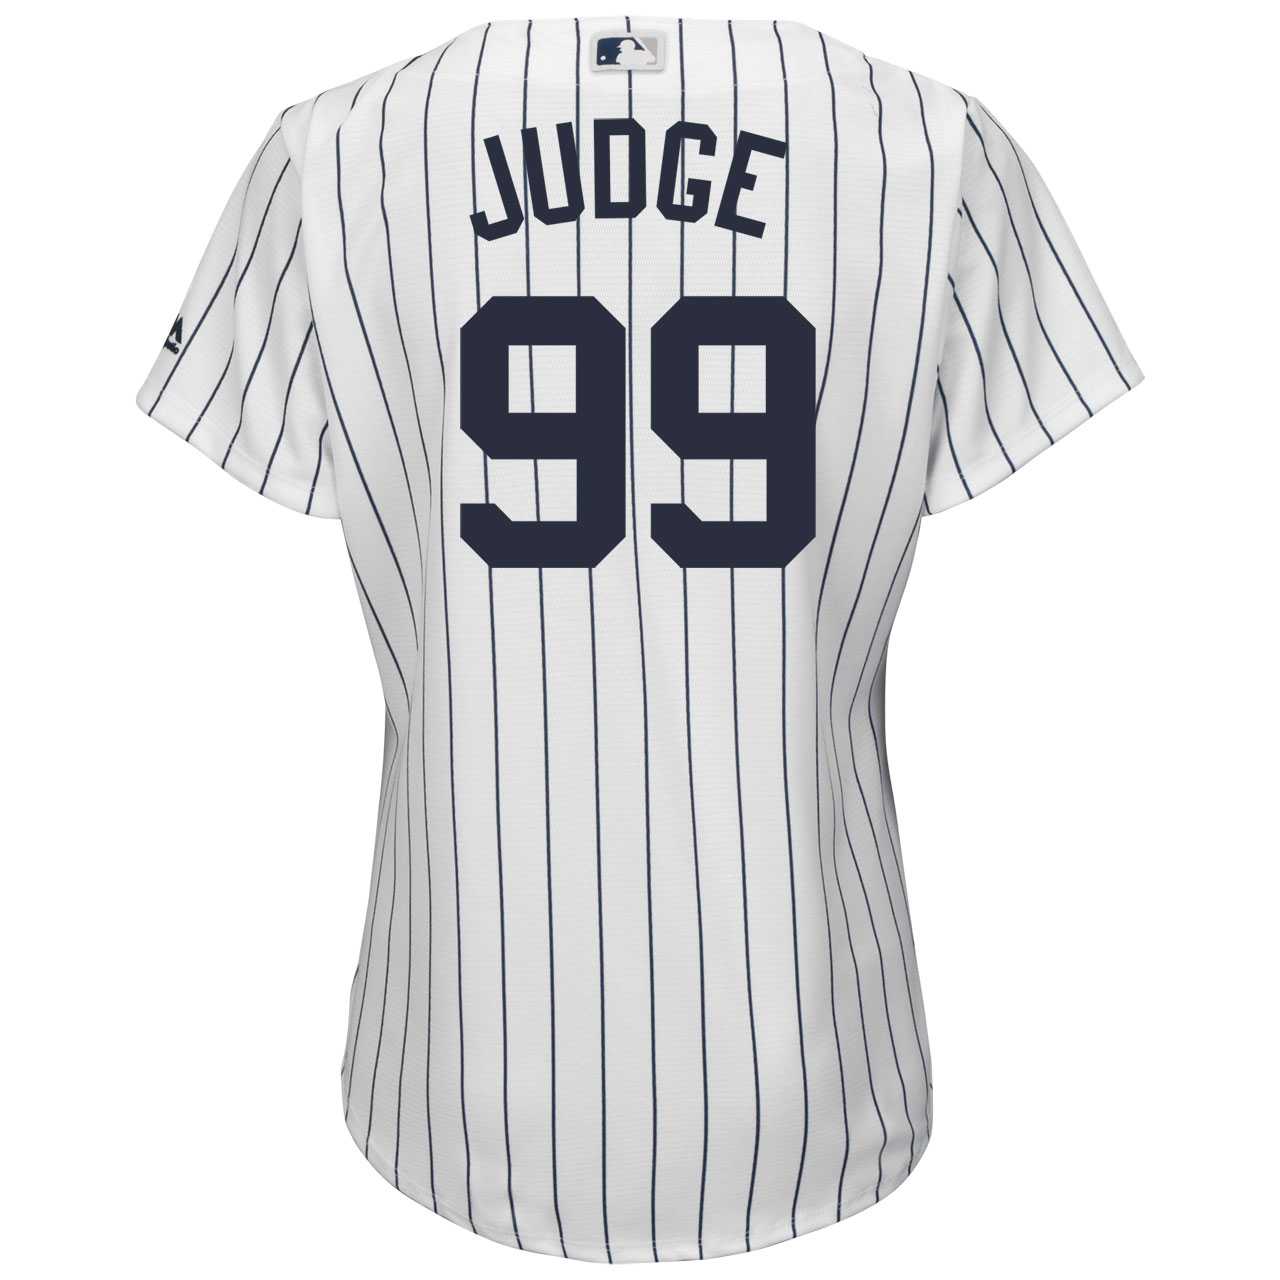 Aaron Judge's Jersey from Yankees Debut Sold for $157,366 at